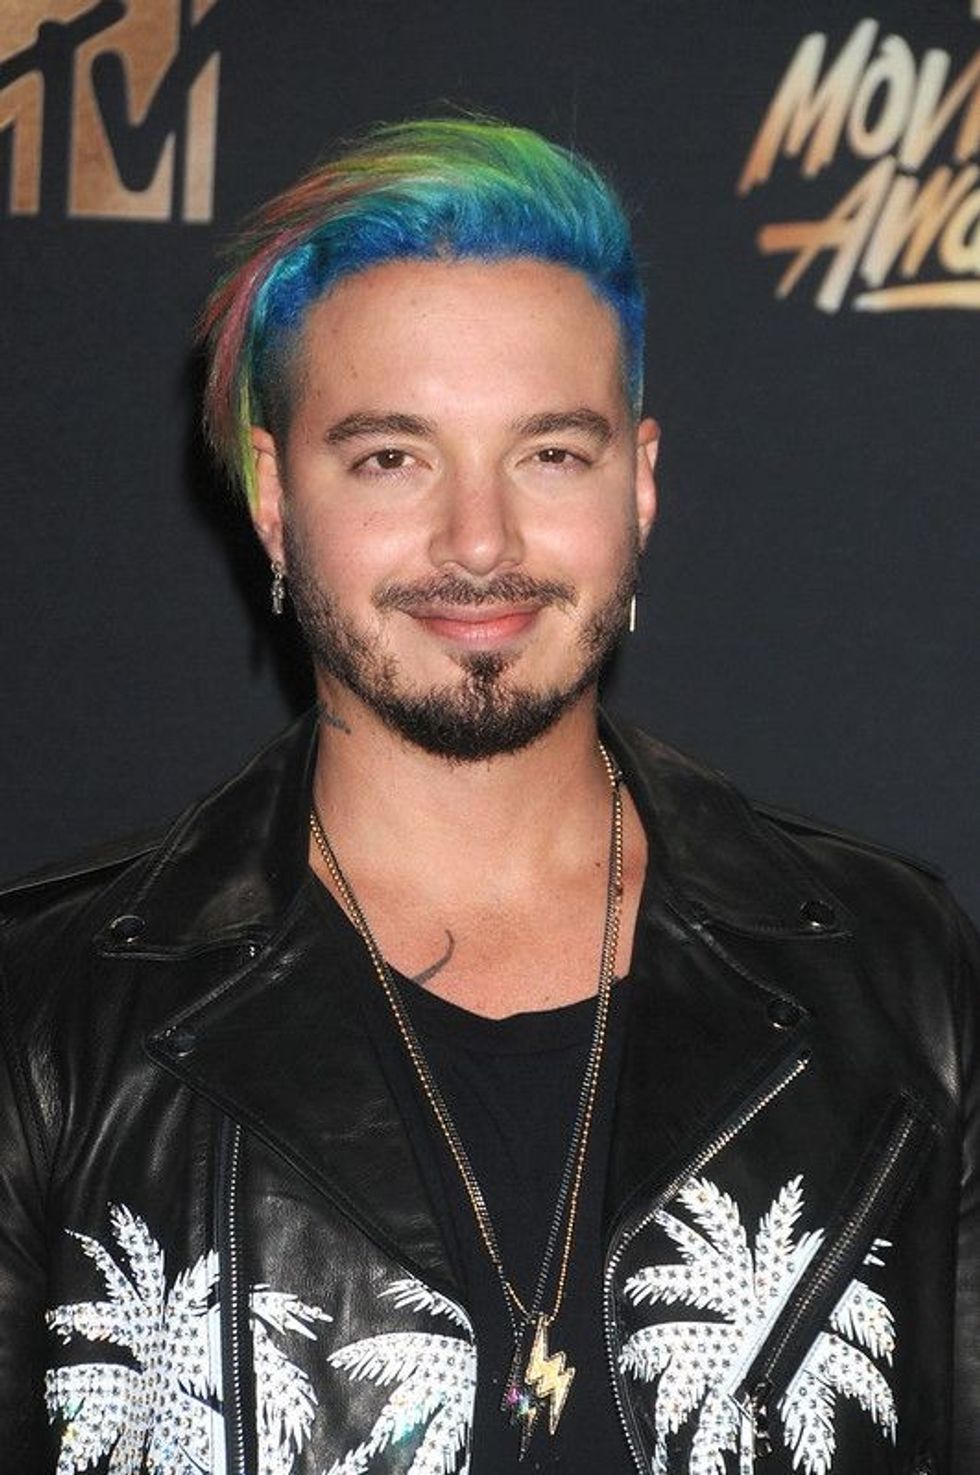 Read out these fantastic 101 J Balvin quotes. Read more inspiring quotes here at Kidadl.